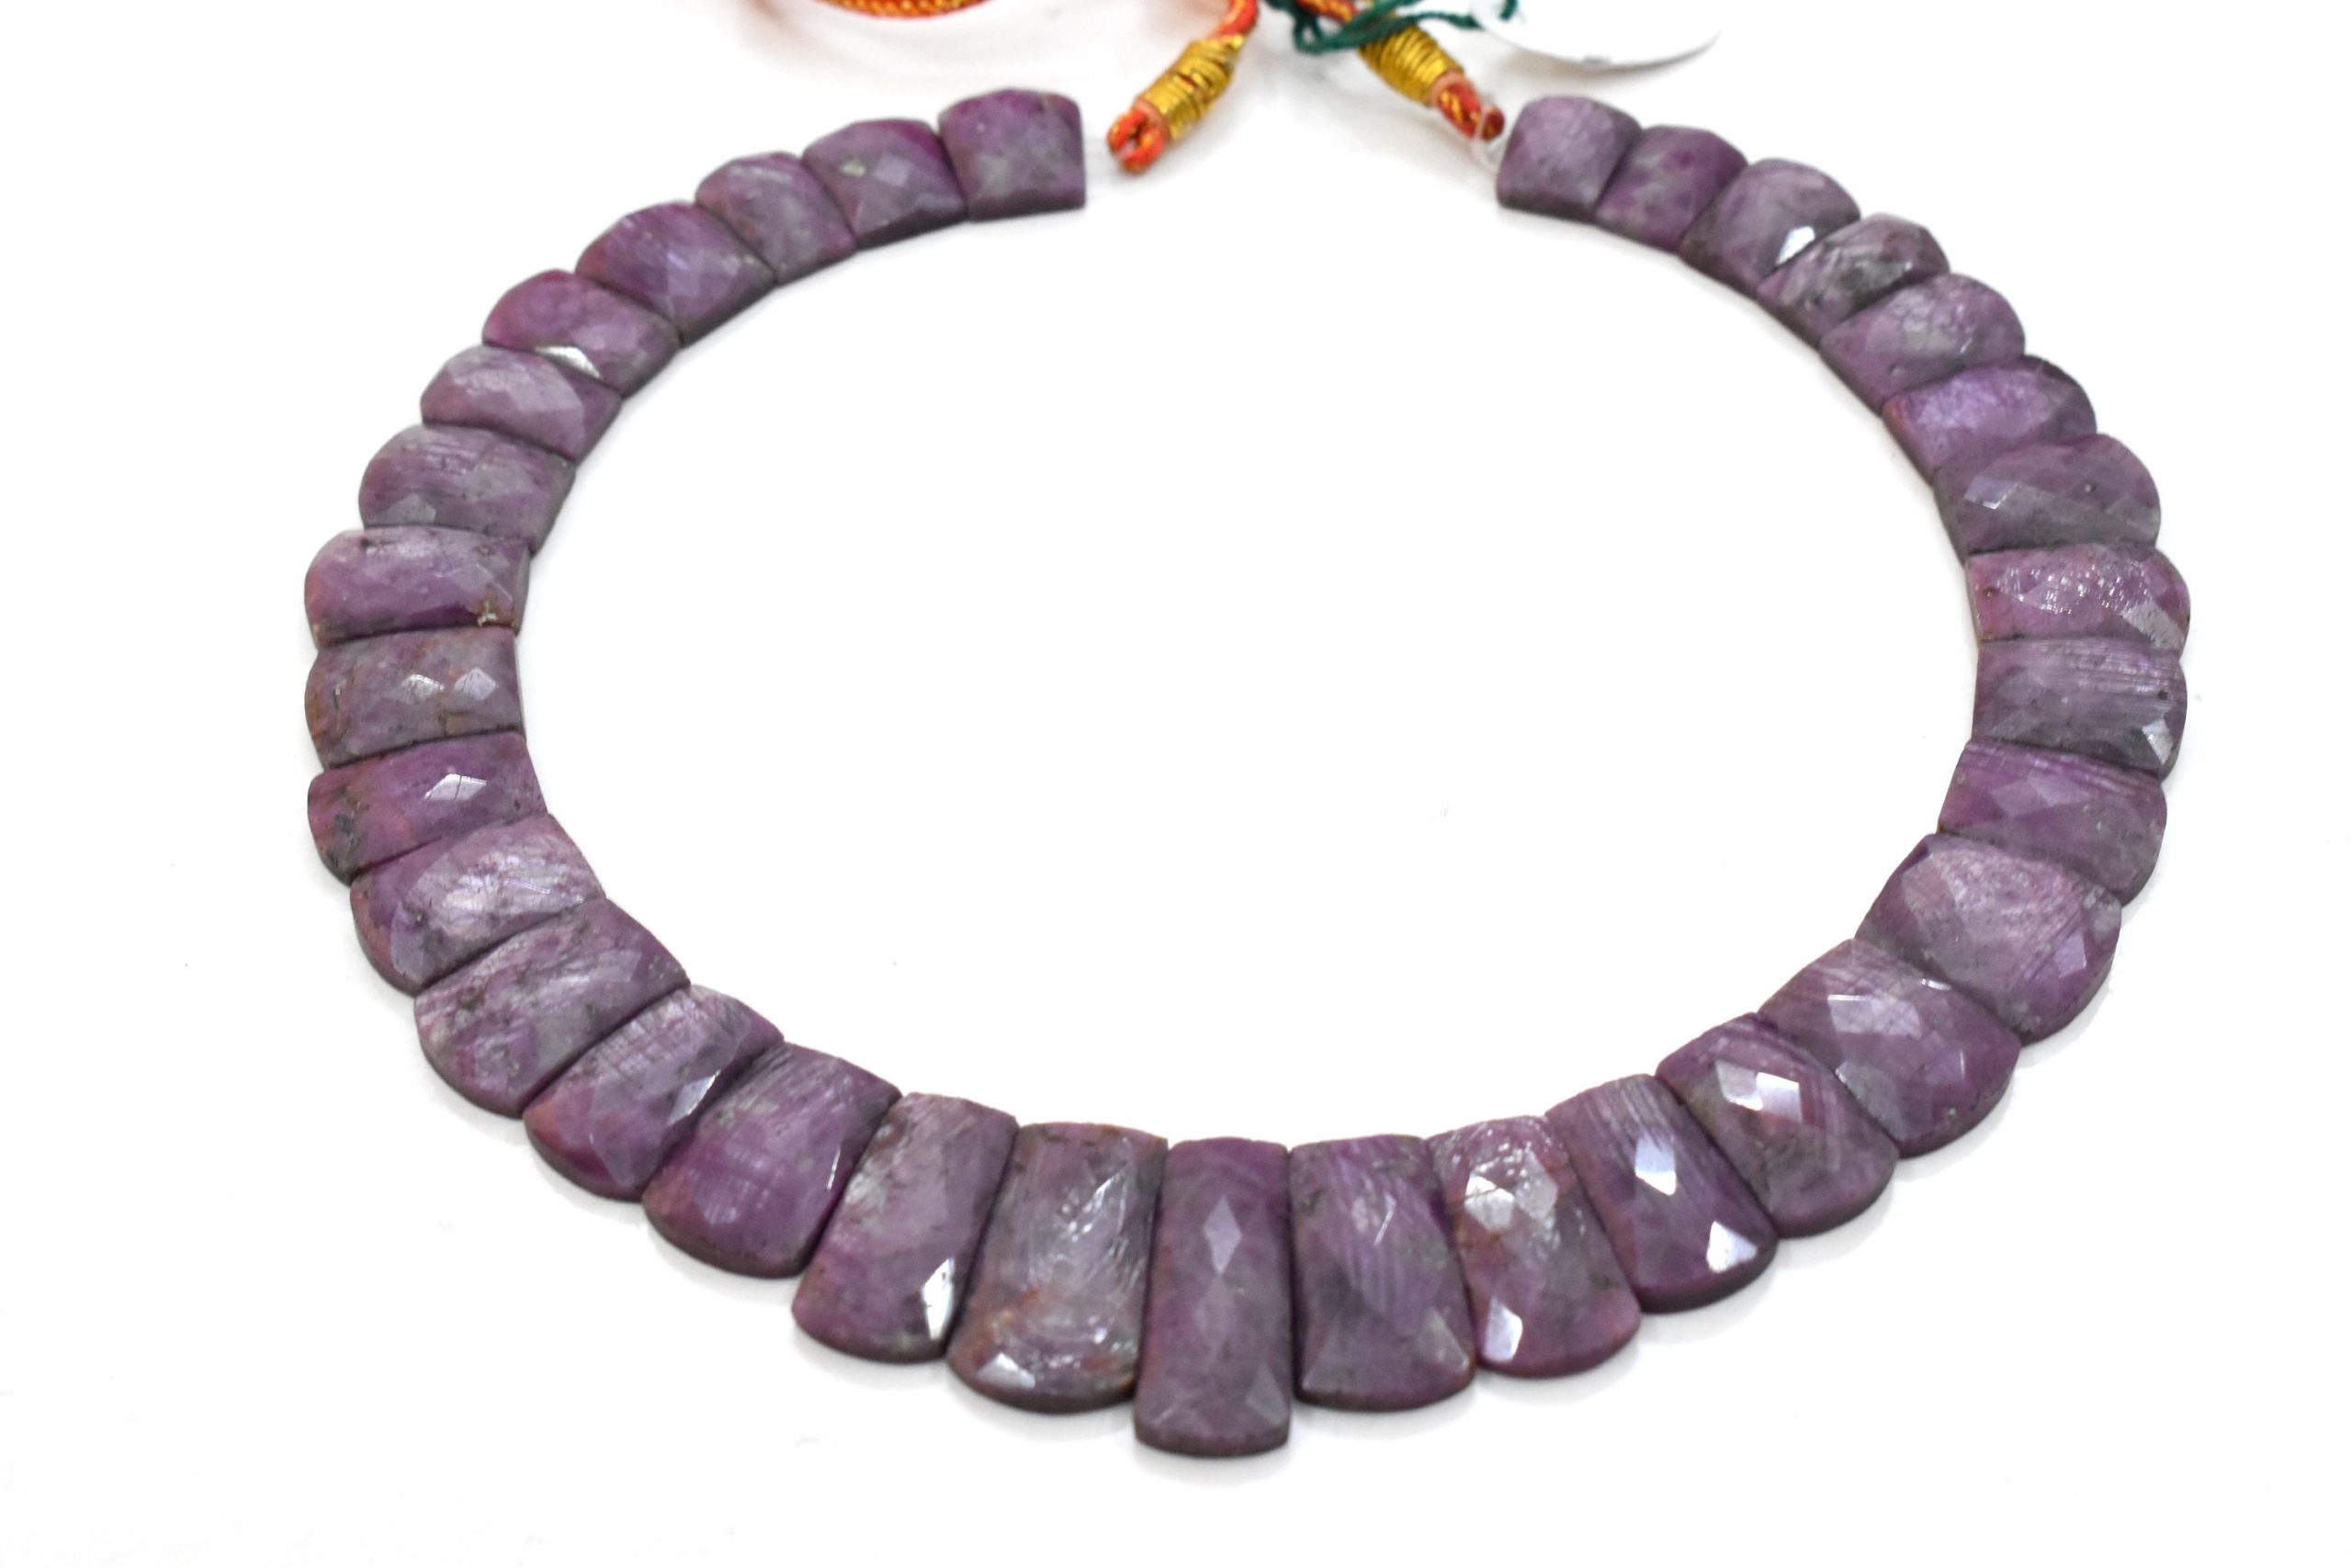 100% Natural Ruby Handmade Necklace,Collar Necklace,Princess Necklace,Choker Necklace,Bib Necklace,Matinee Necklace,Handicraft Necklace. | Save 33% - Rajasthan Living 11